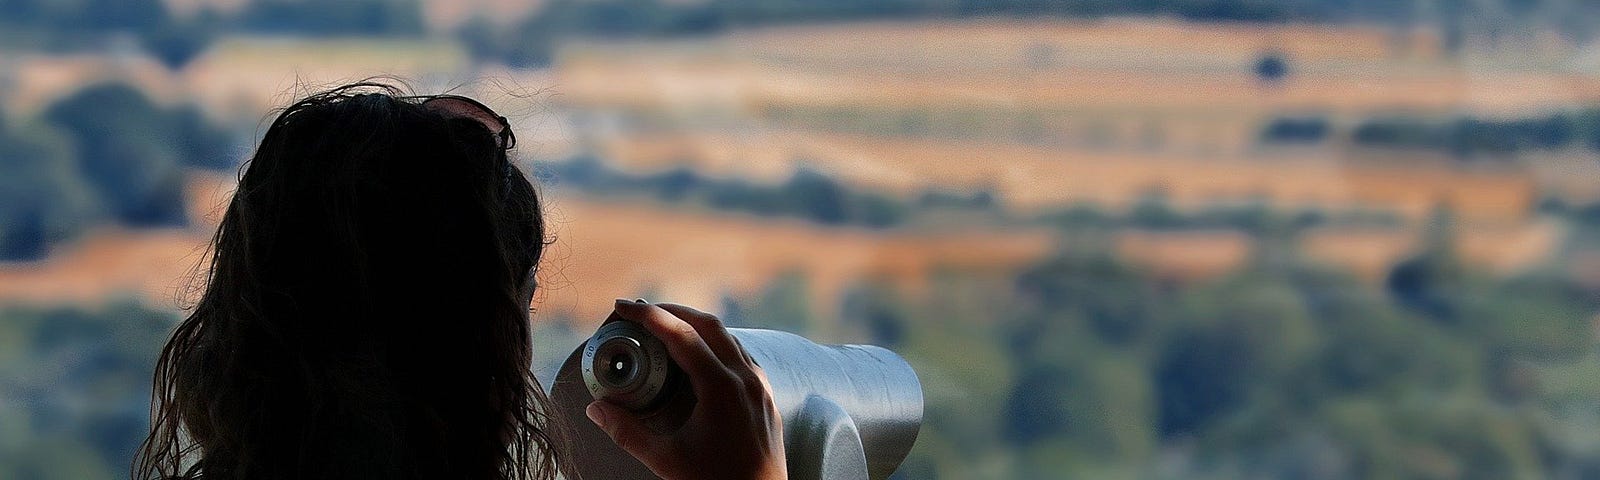 Young woman, getting ready to look at our beautiful earth through a telescope.